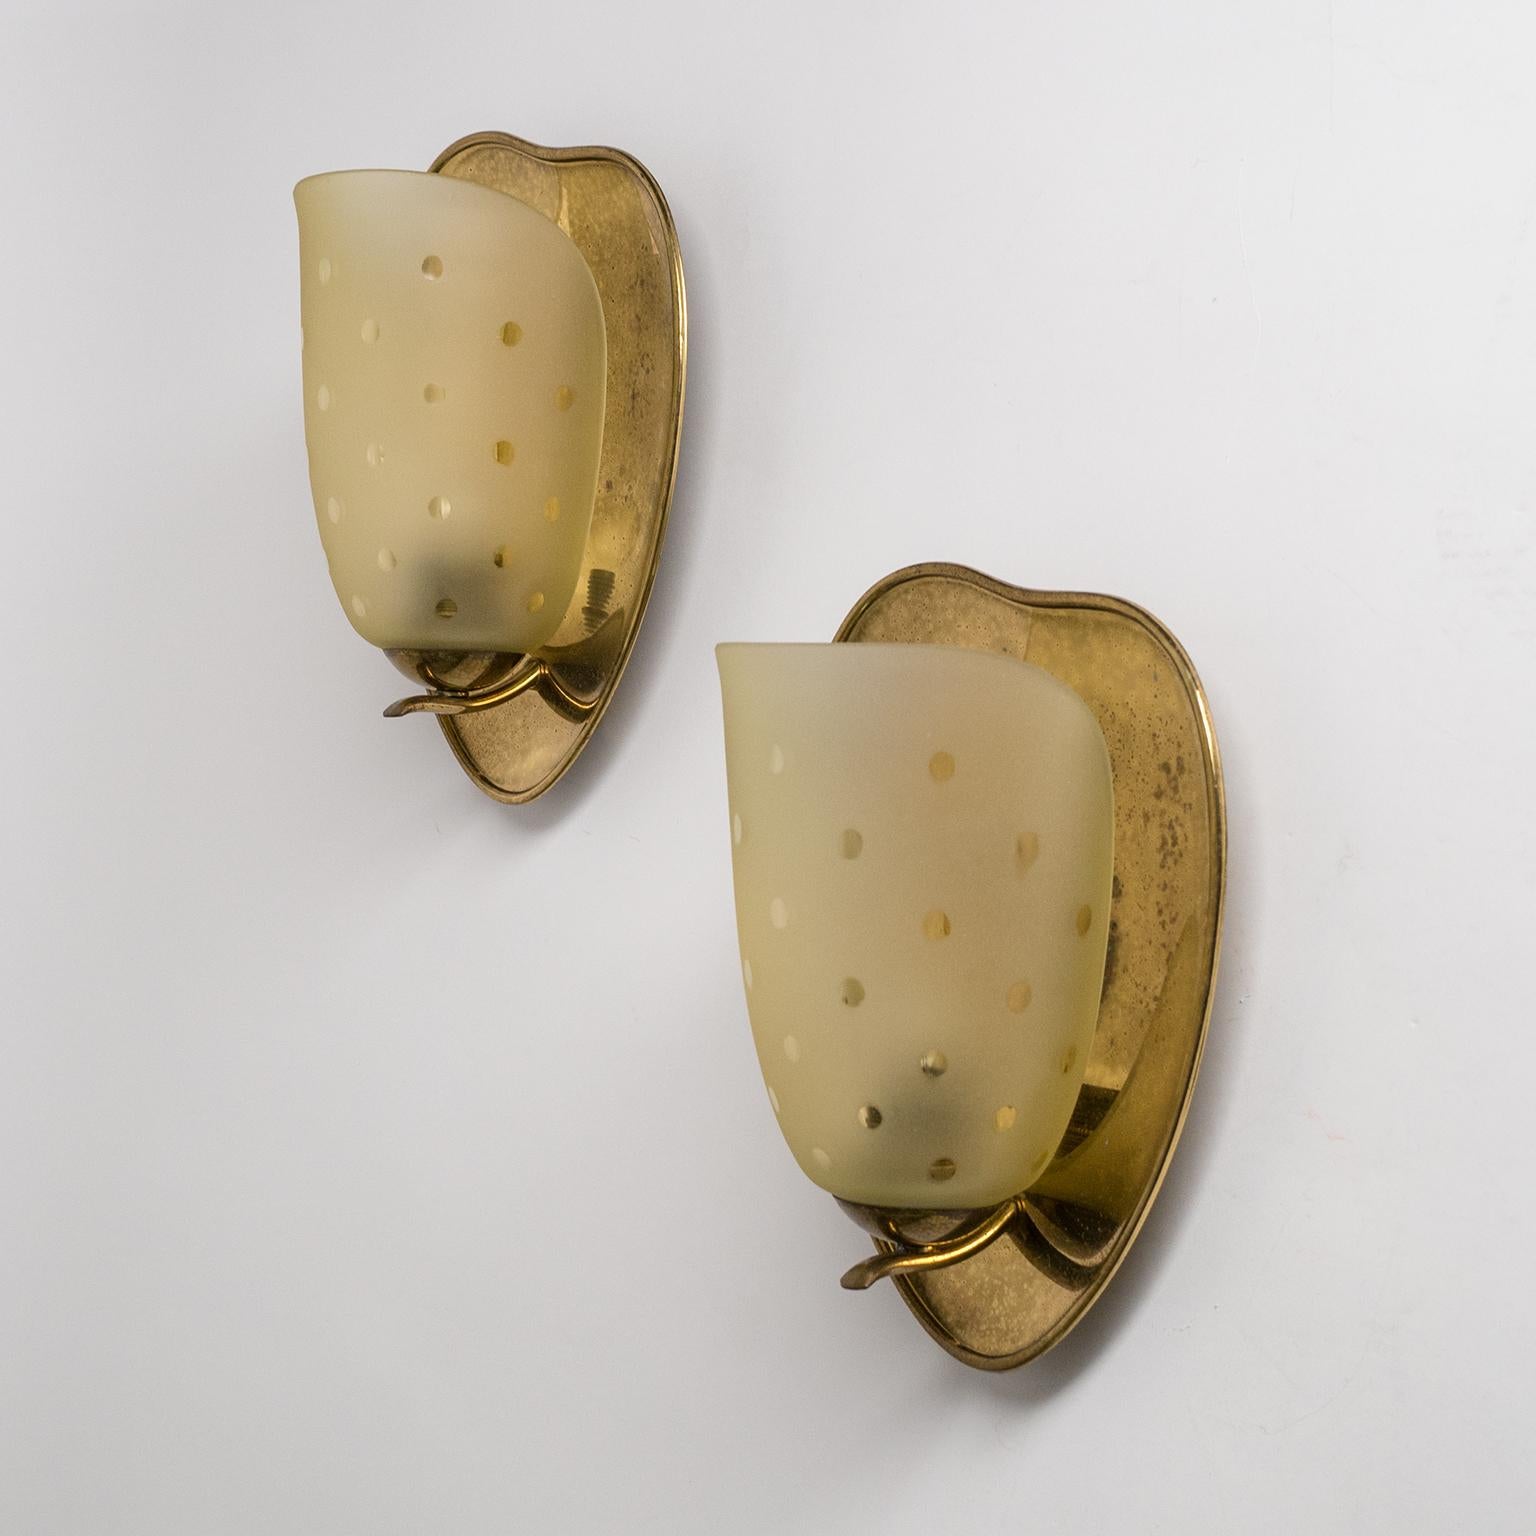 Fine pair of 1940s Art Deco sconces in brass and amber tinted glass. The blown glass tulips are frosted with clear dots. Nice original condition with a rich patina on the brass and one original brass and ceramic E27 socket per light.